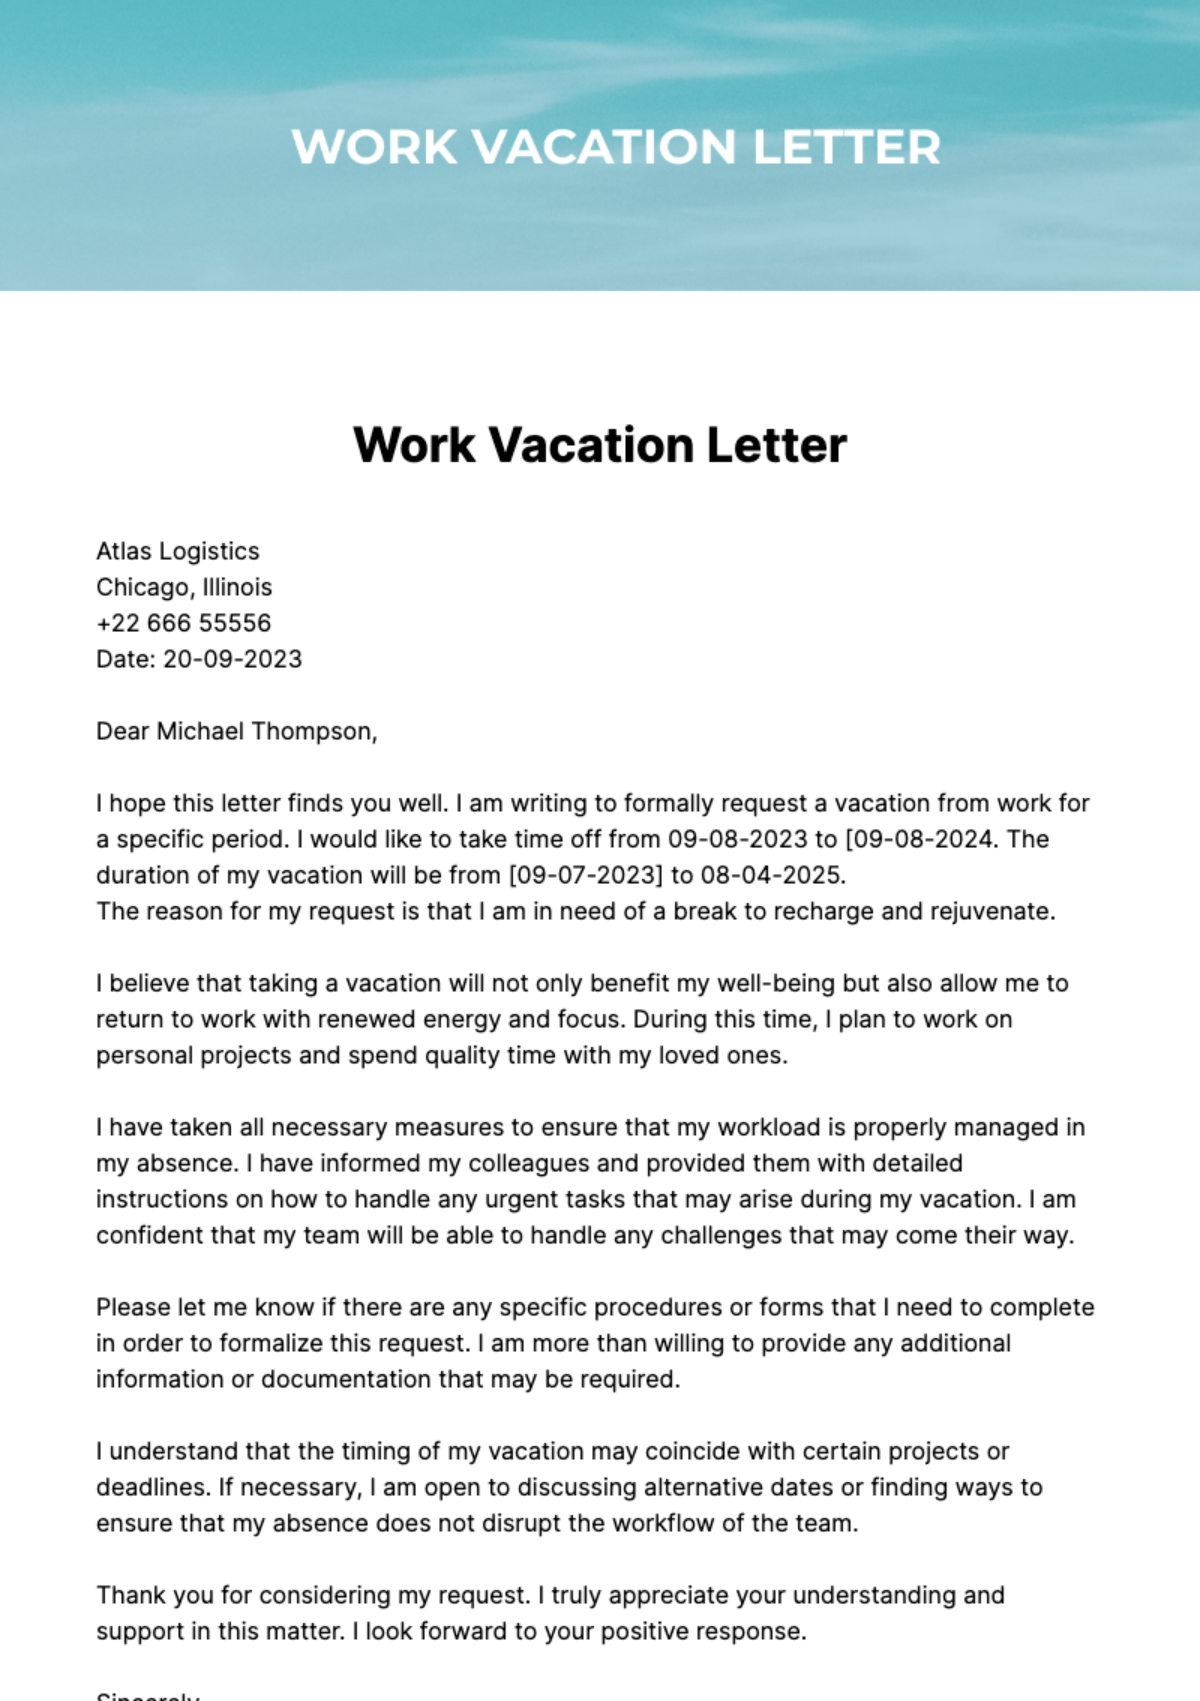 Work Vacation Letter Template